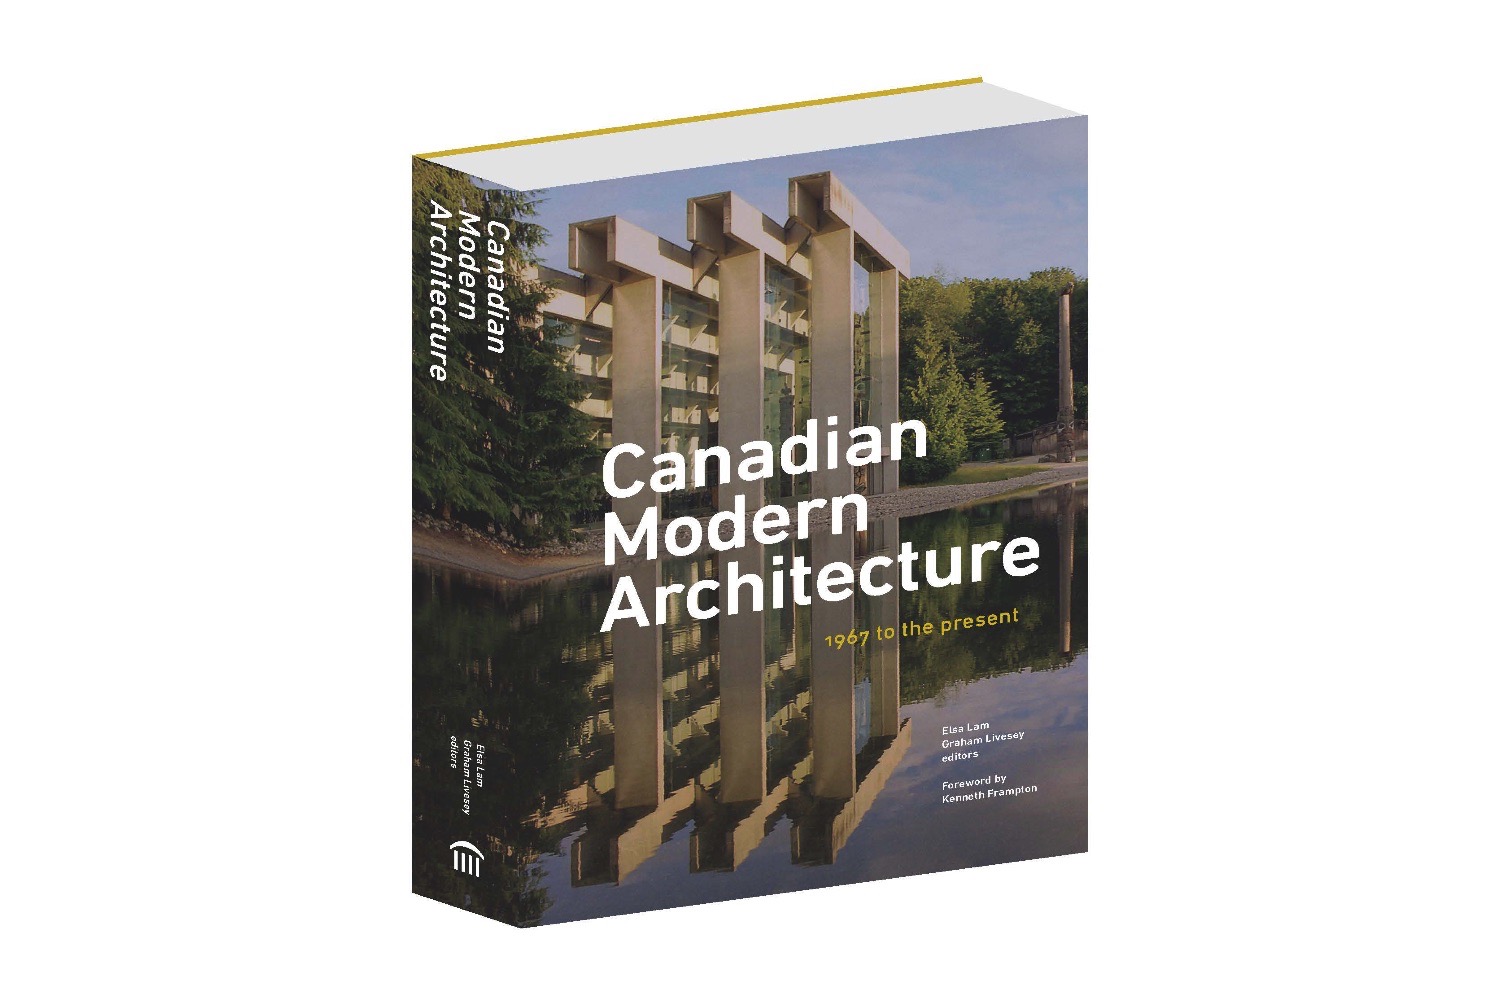 photo.of.book.titled.canadian.modern.architcture